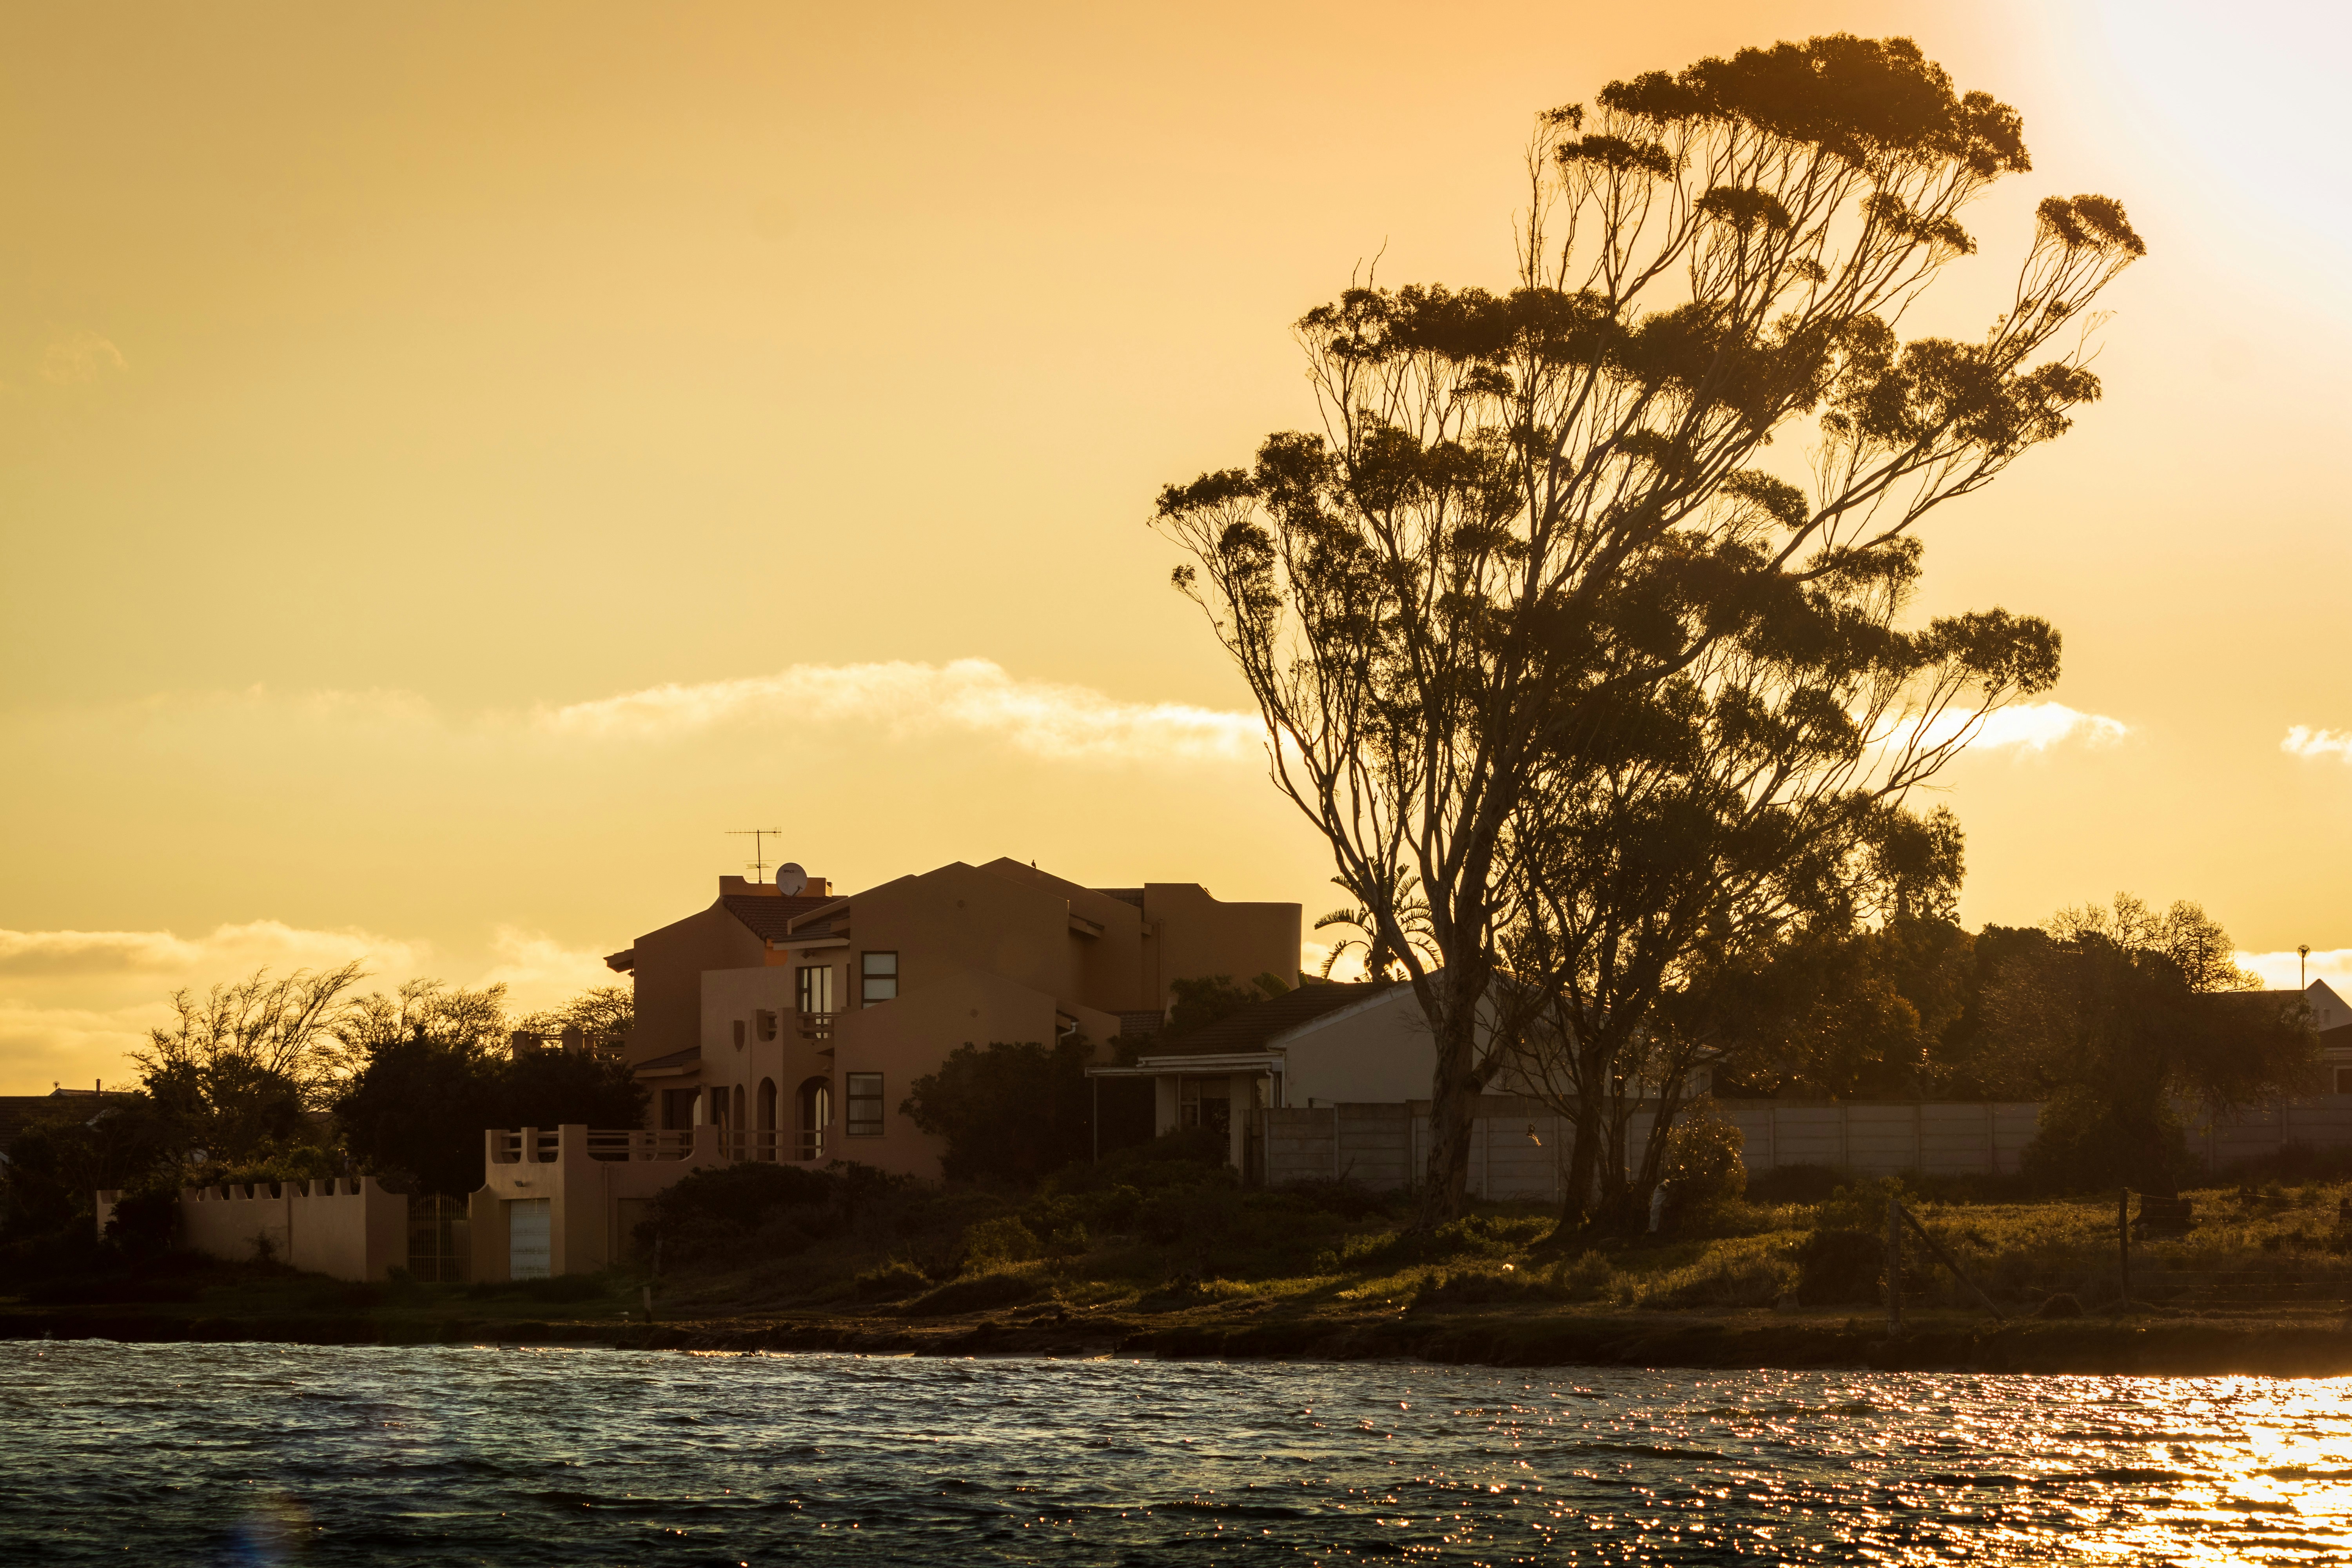 Windswept tree in front of a holiday house on a river at sunset